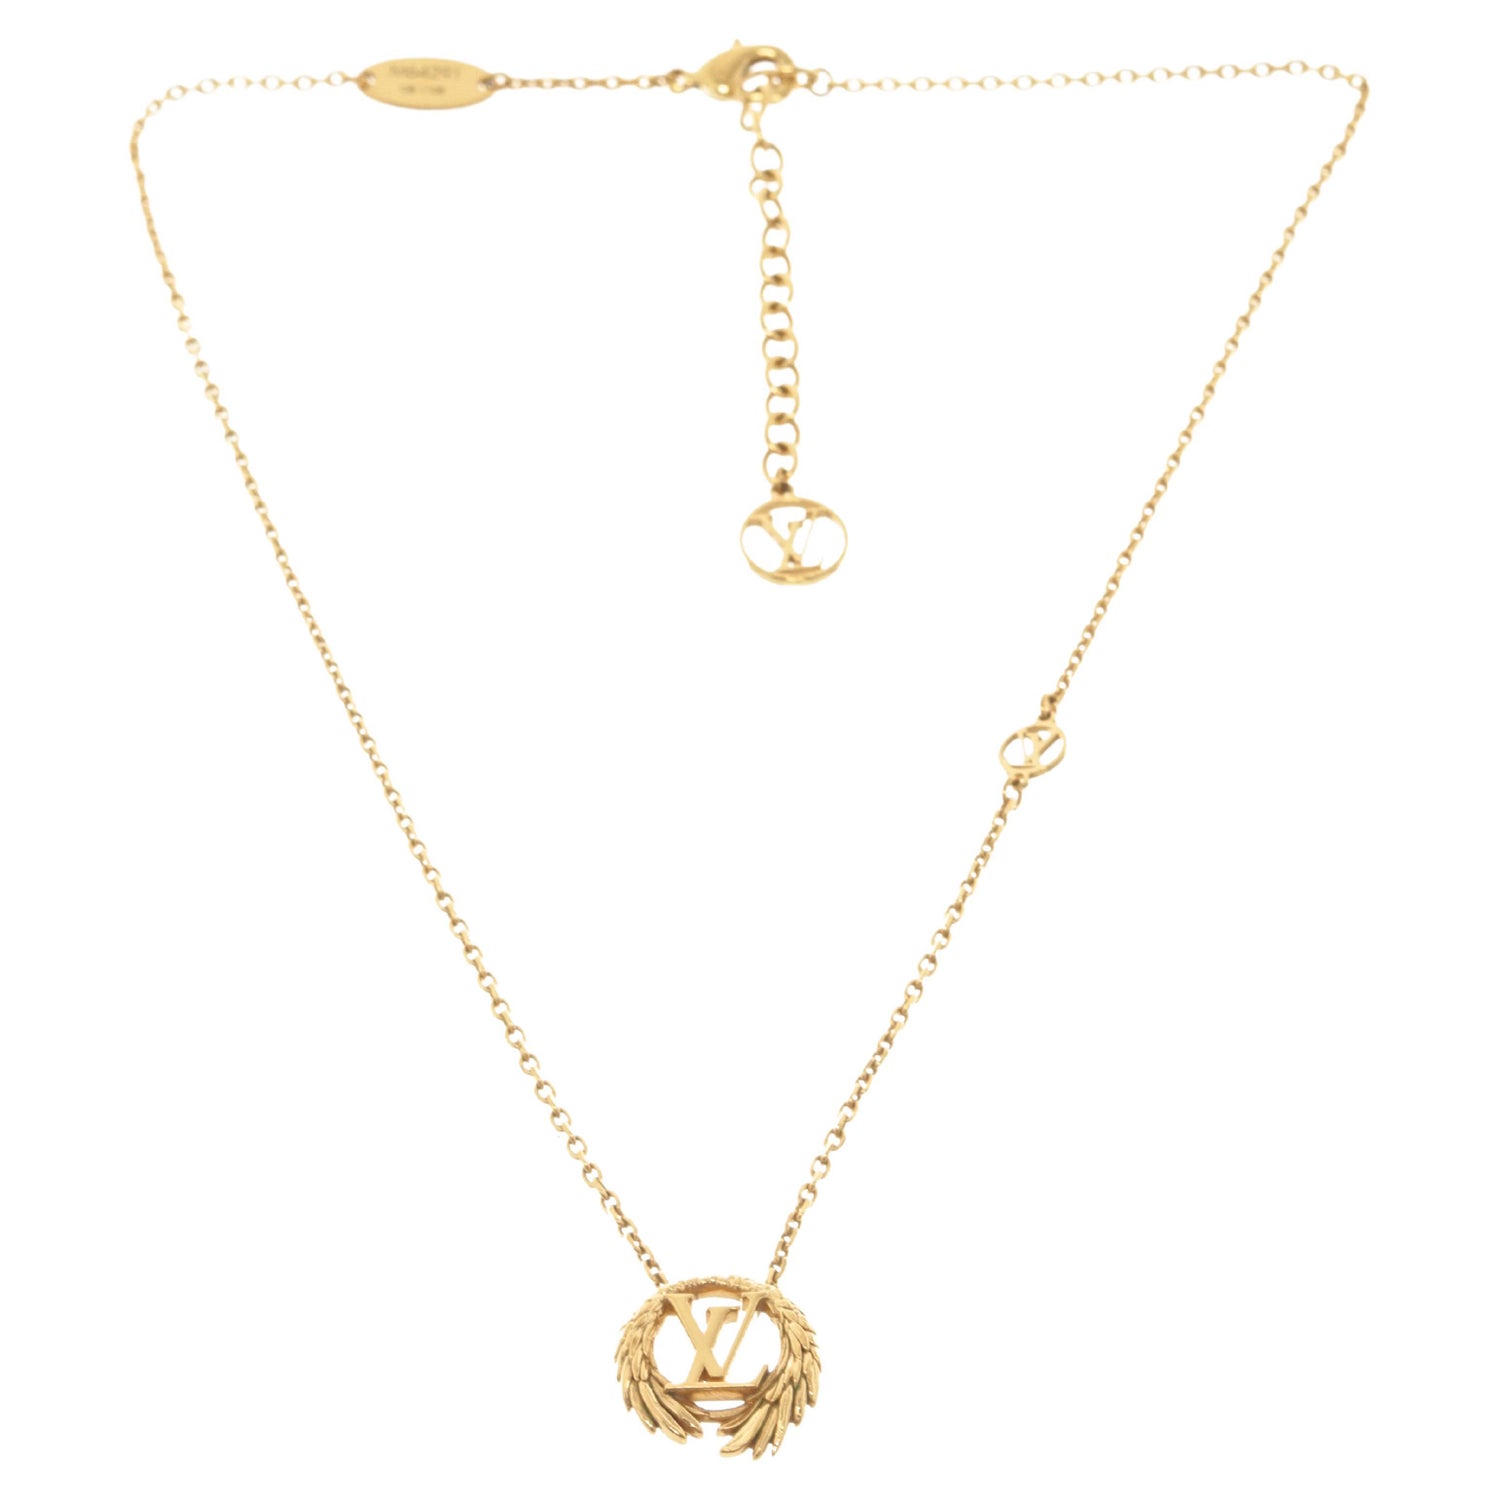 Idylle blossom necklace Louis Vuitton Gold in Metal - 37190137